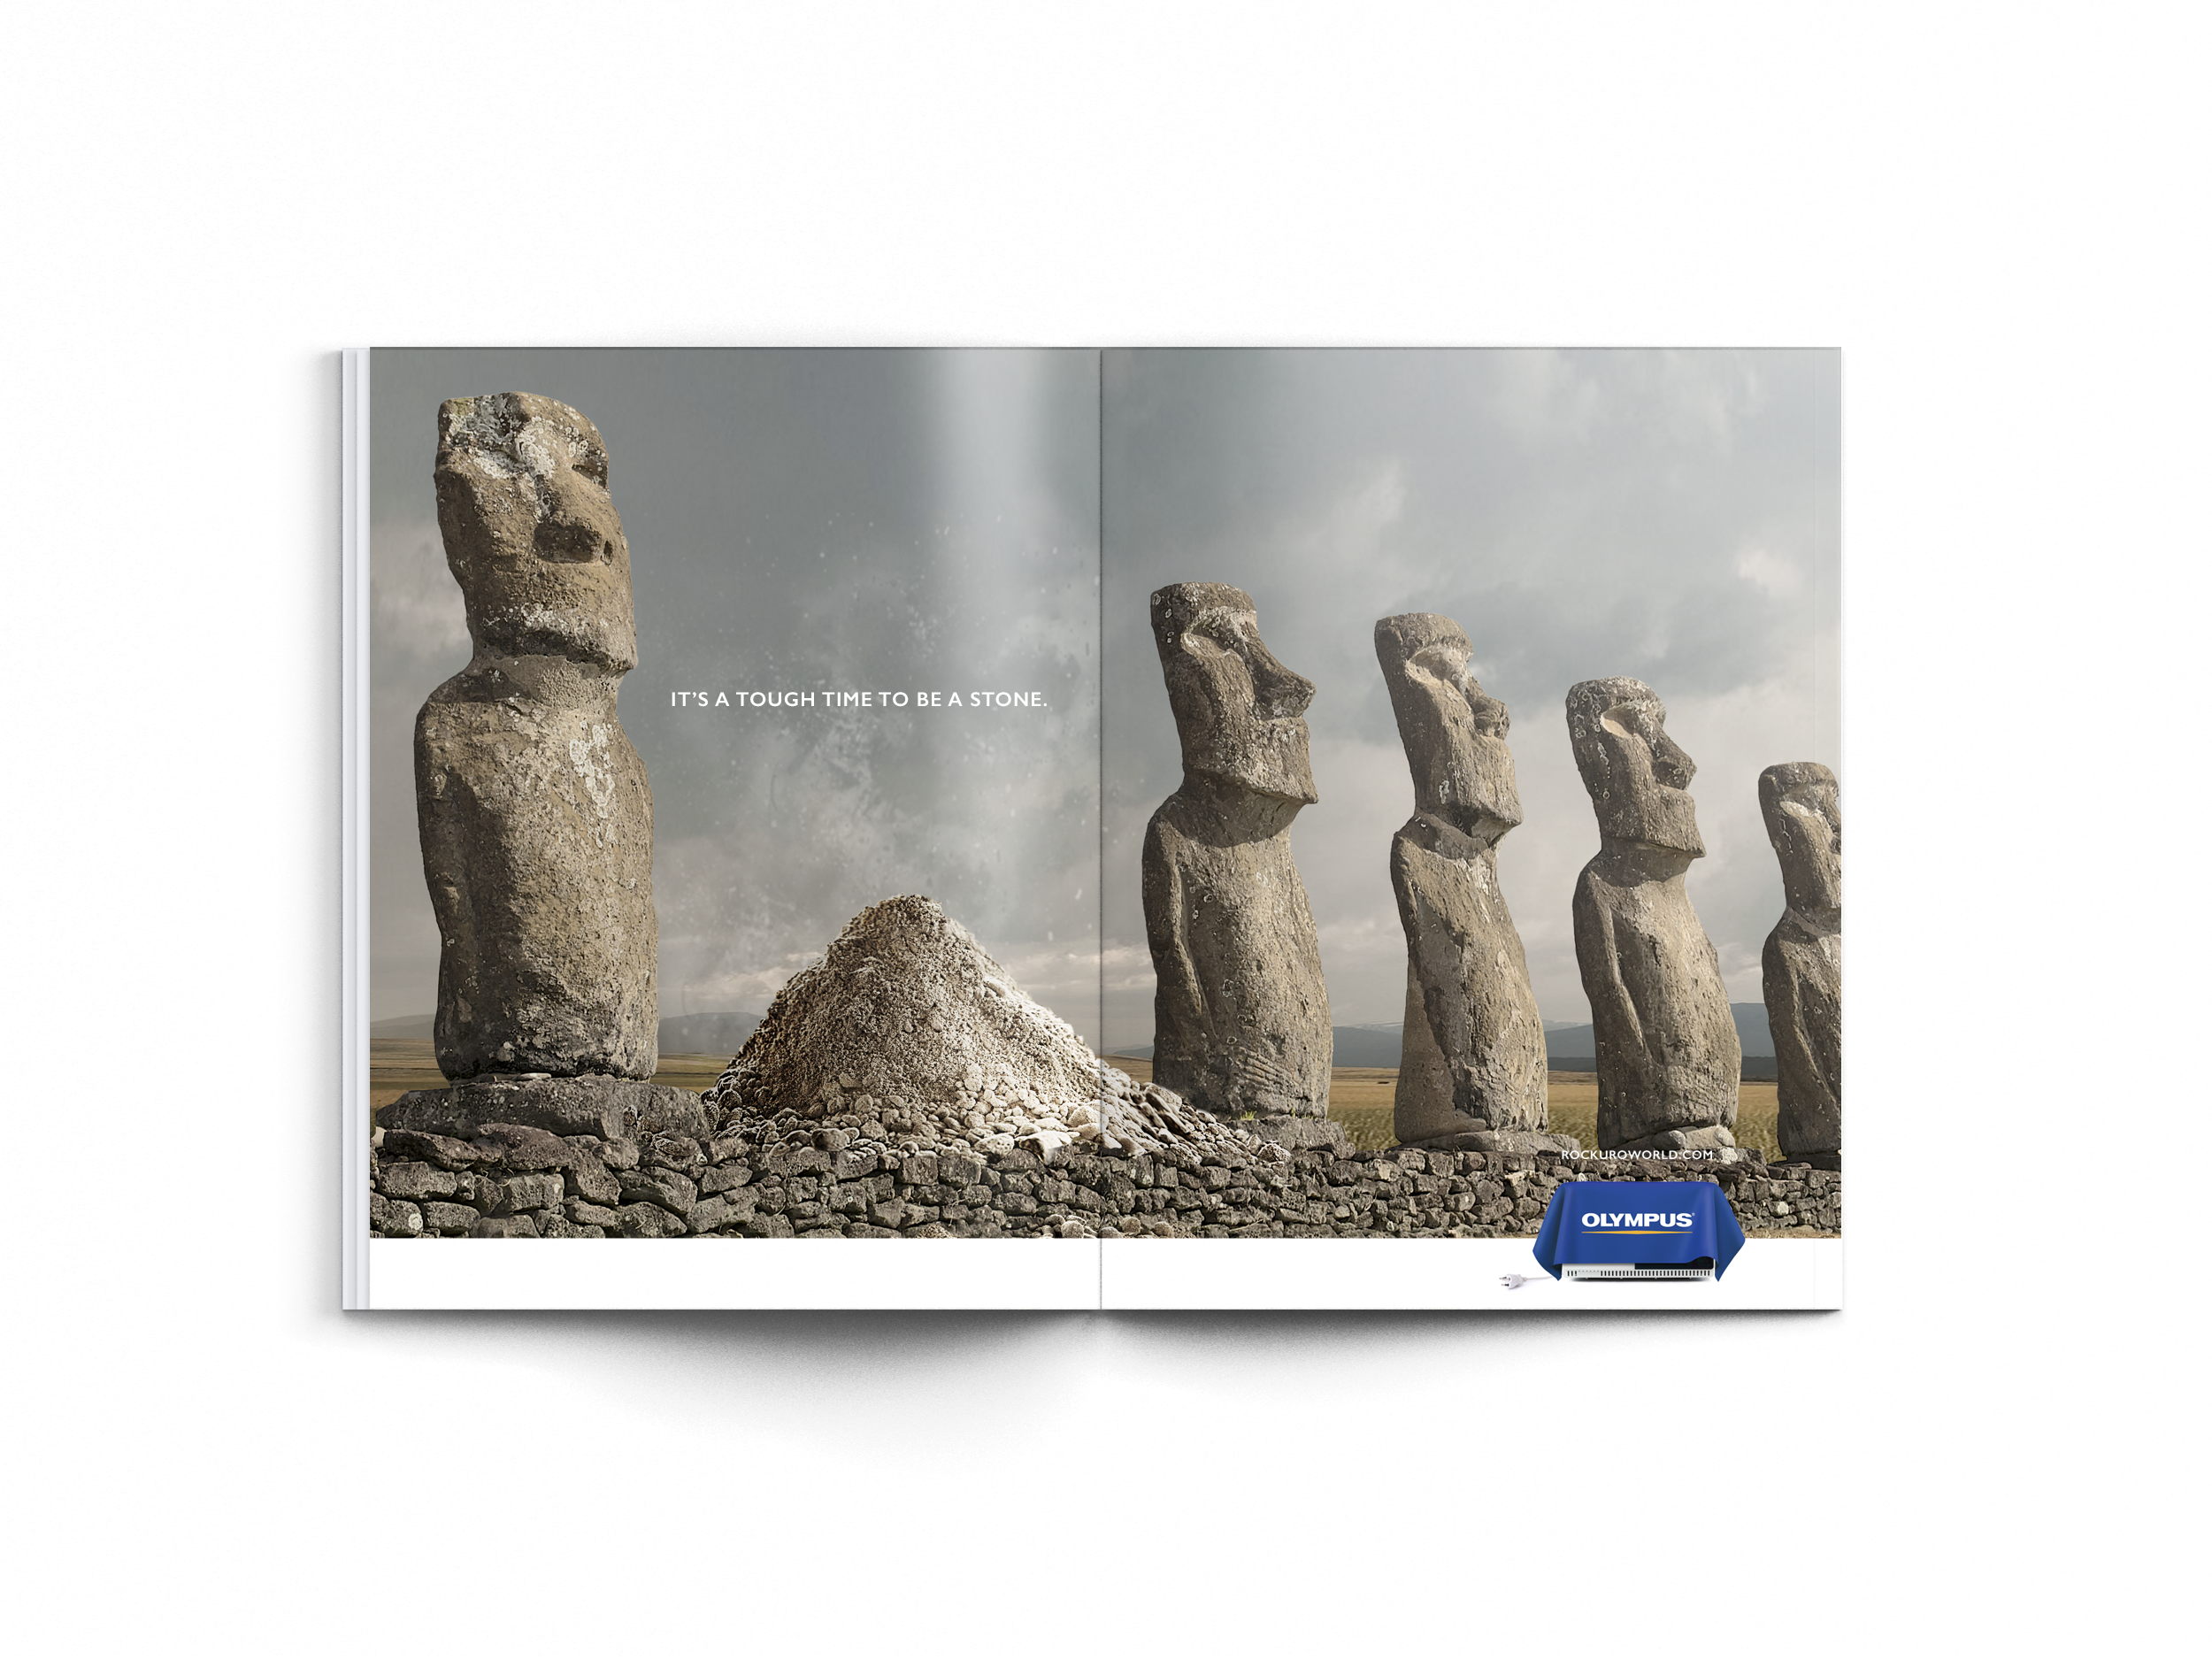 Easter Island.png